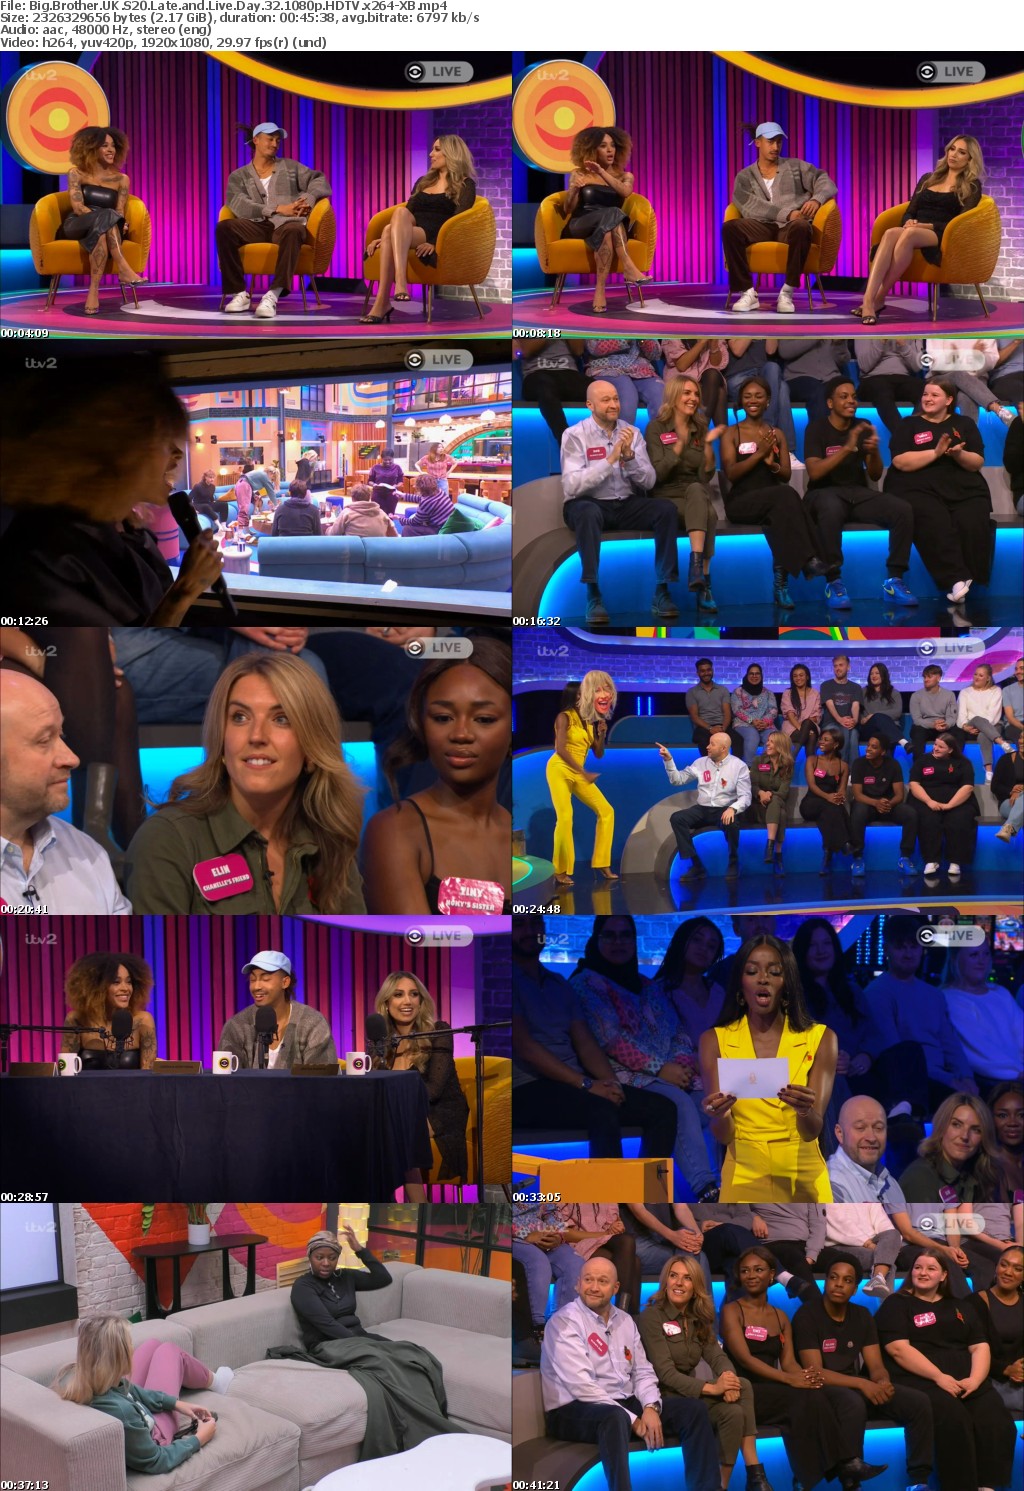 Big Brother UK S20 Late and Live Day 32 1080p HDTV x264-XB